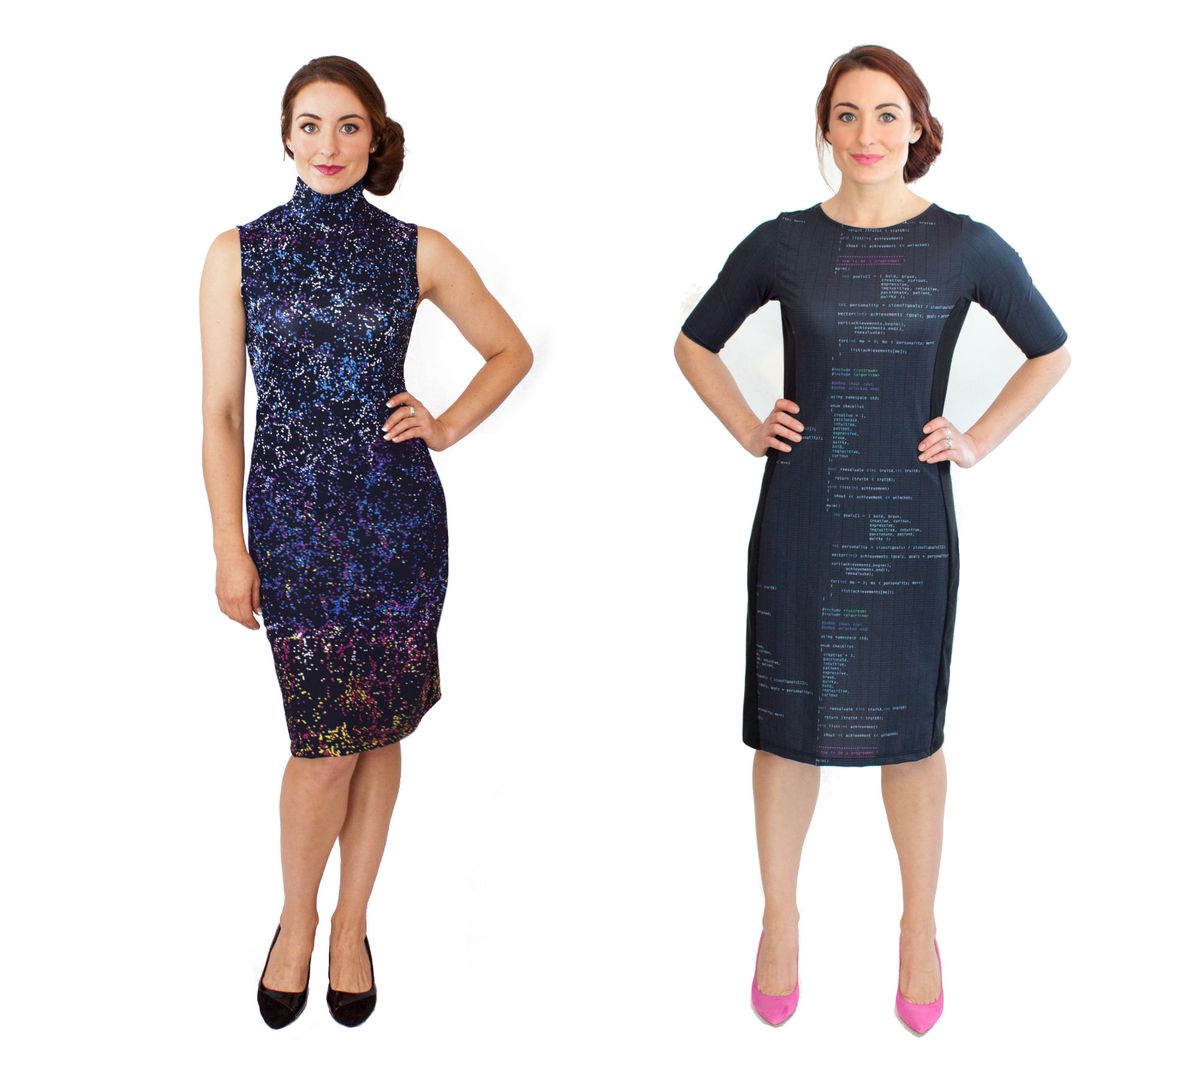 A model wearing a dress with a dark matter print, and another with a code print